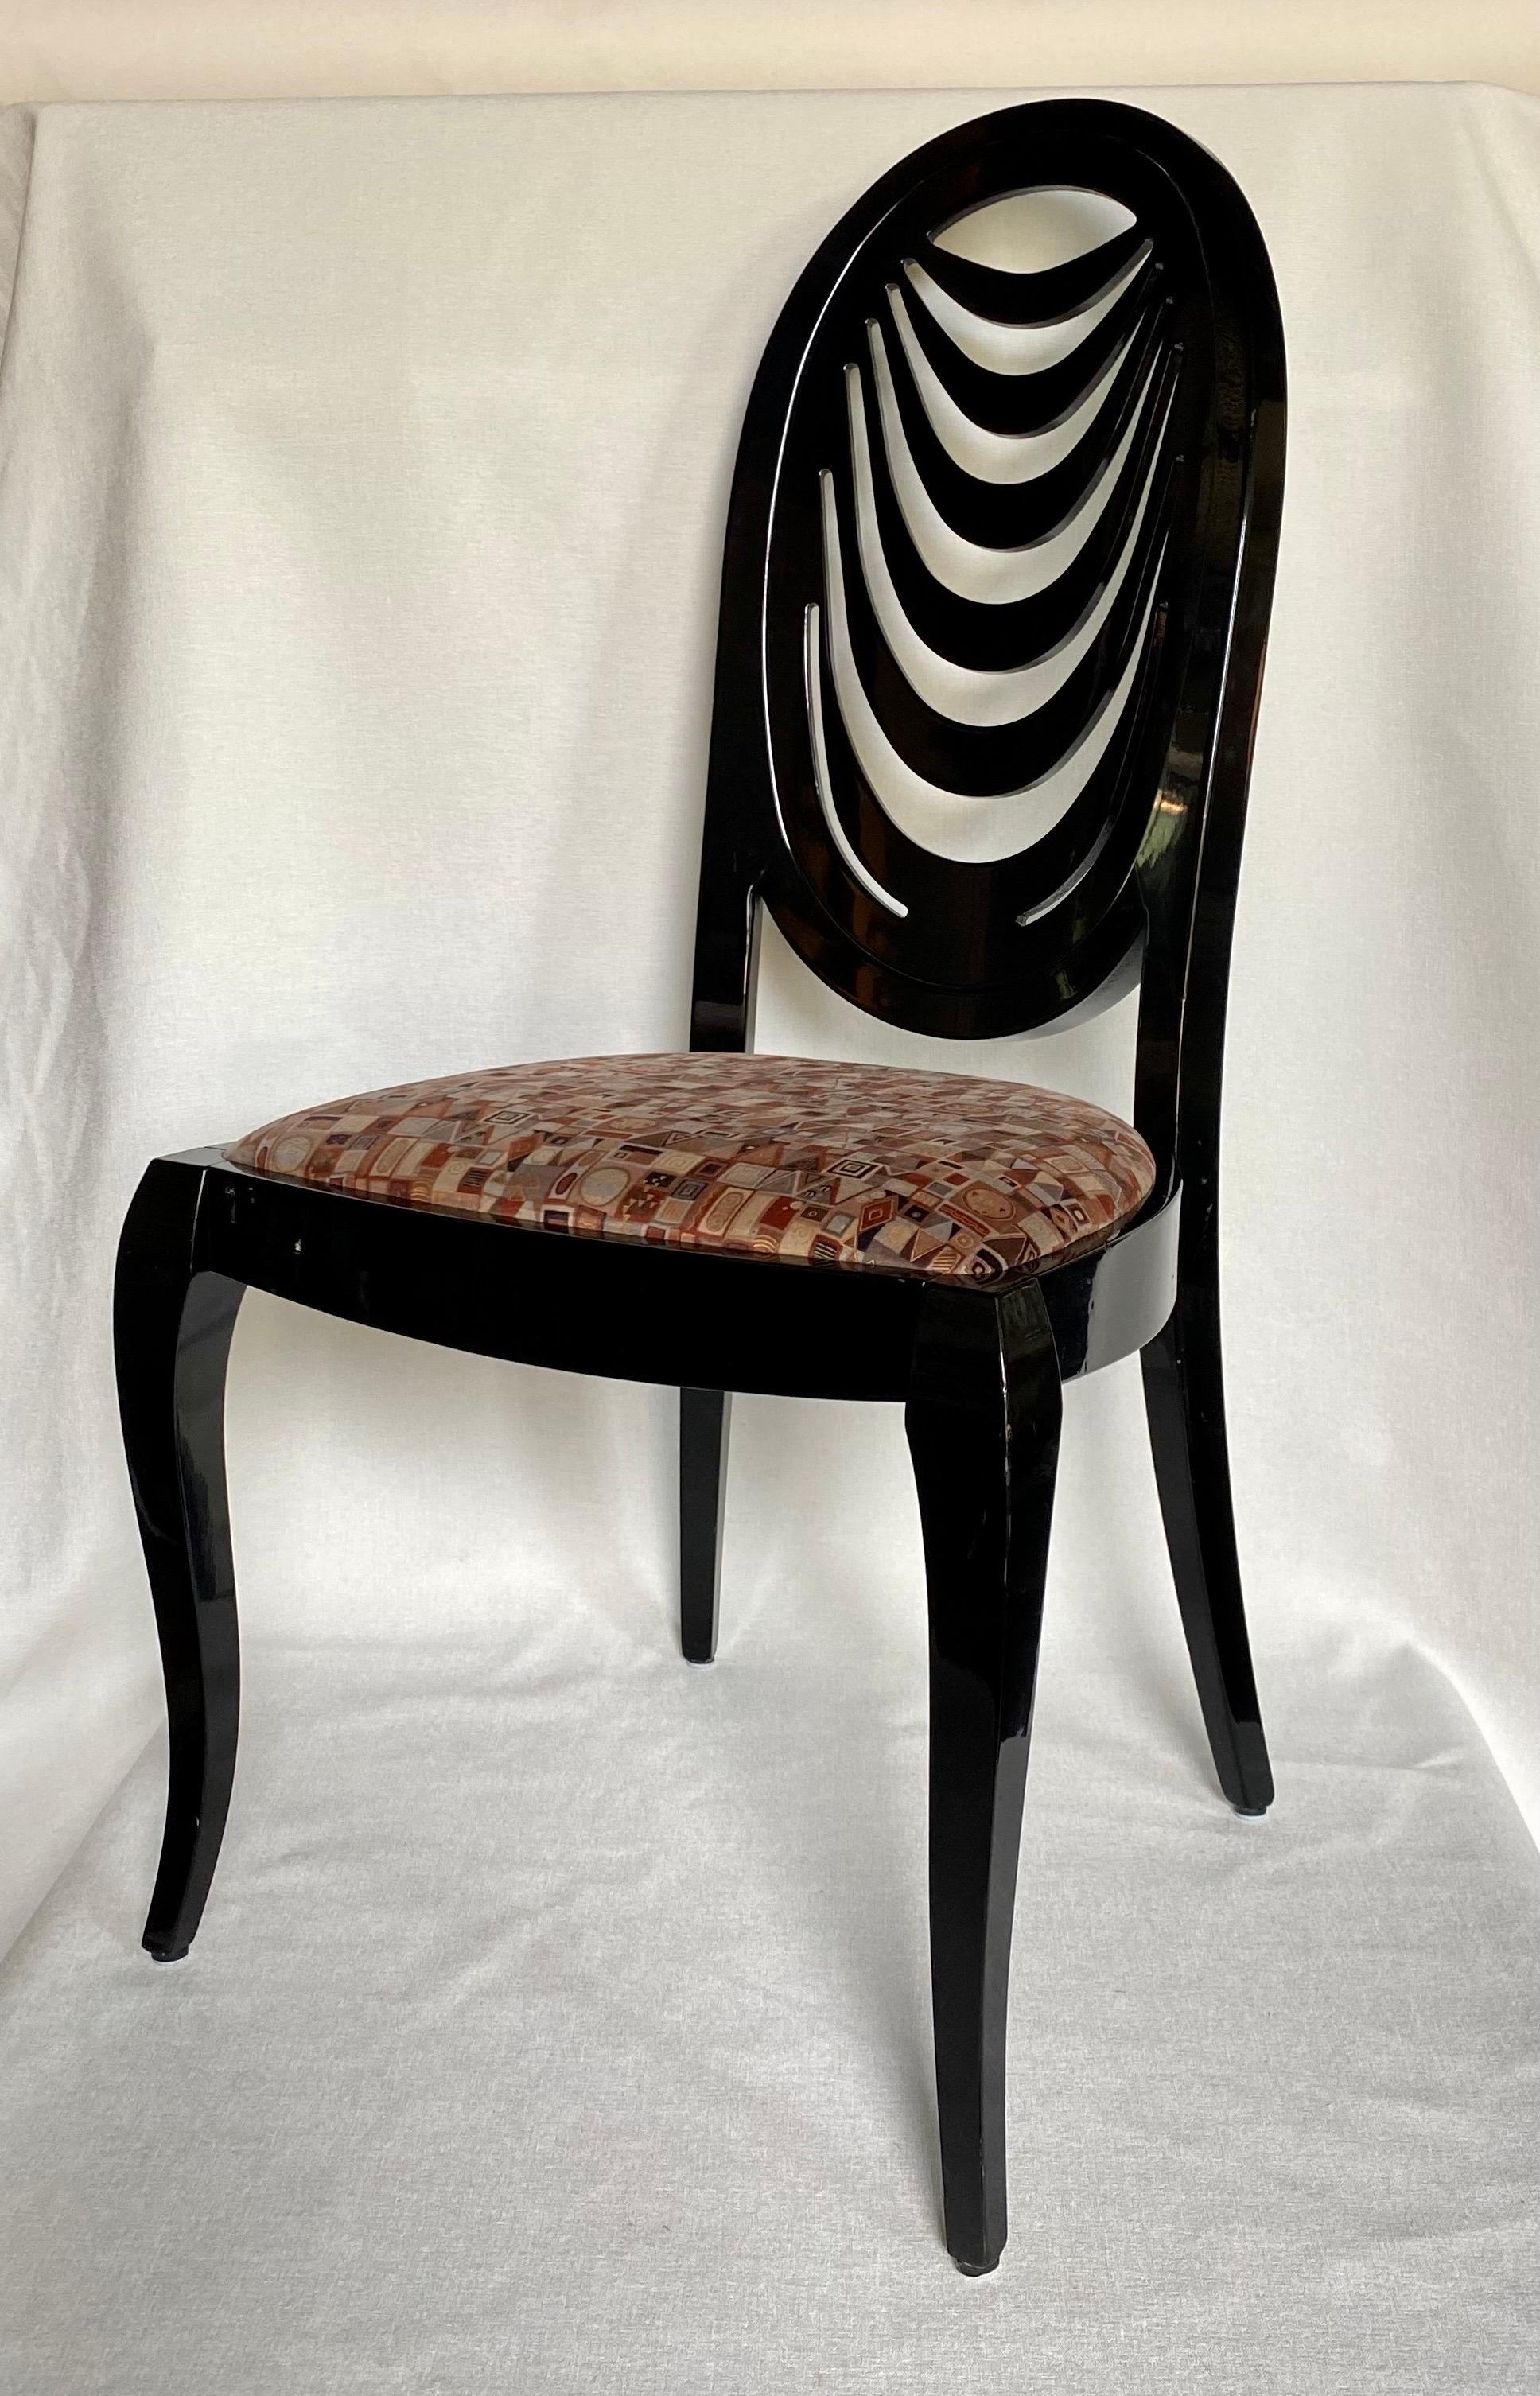 Fabulous Hollywood Regency Style Italian black lacquer side chair designed by Pietro Costantini for Ello Furniture. This sculptural accent or desk chair features a graphic draped back with curved cabriole legs. Original gloss black lacquer finish